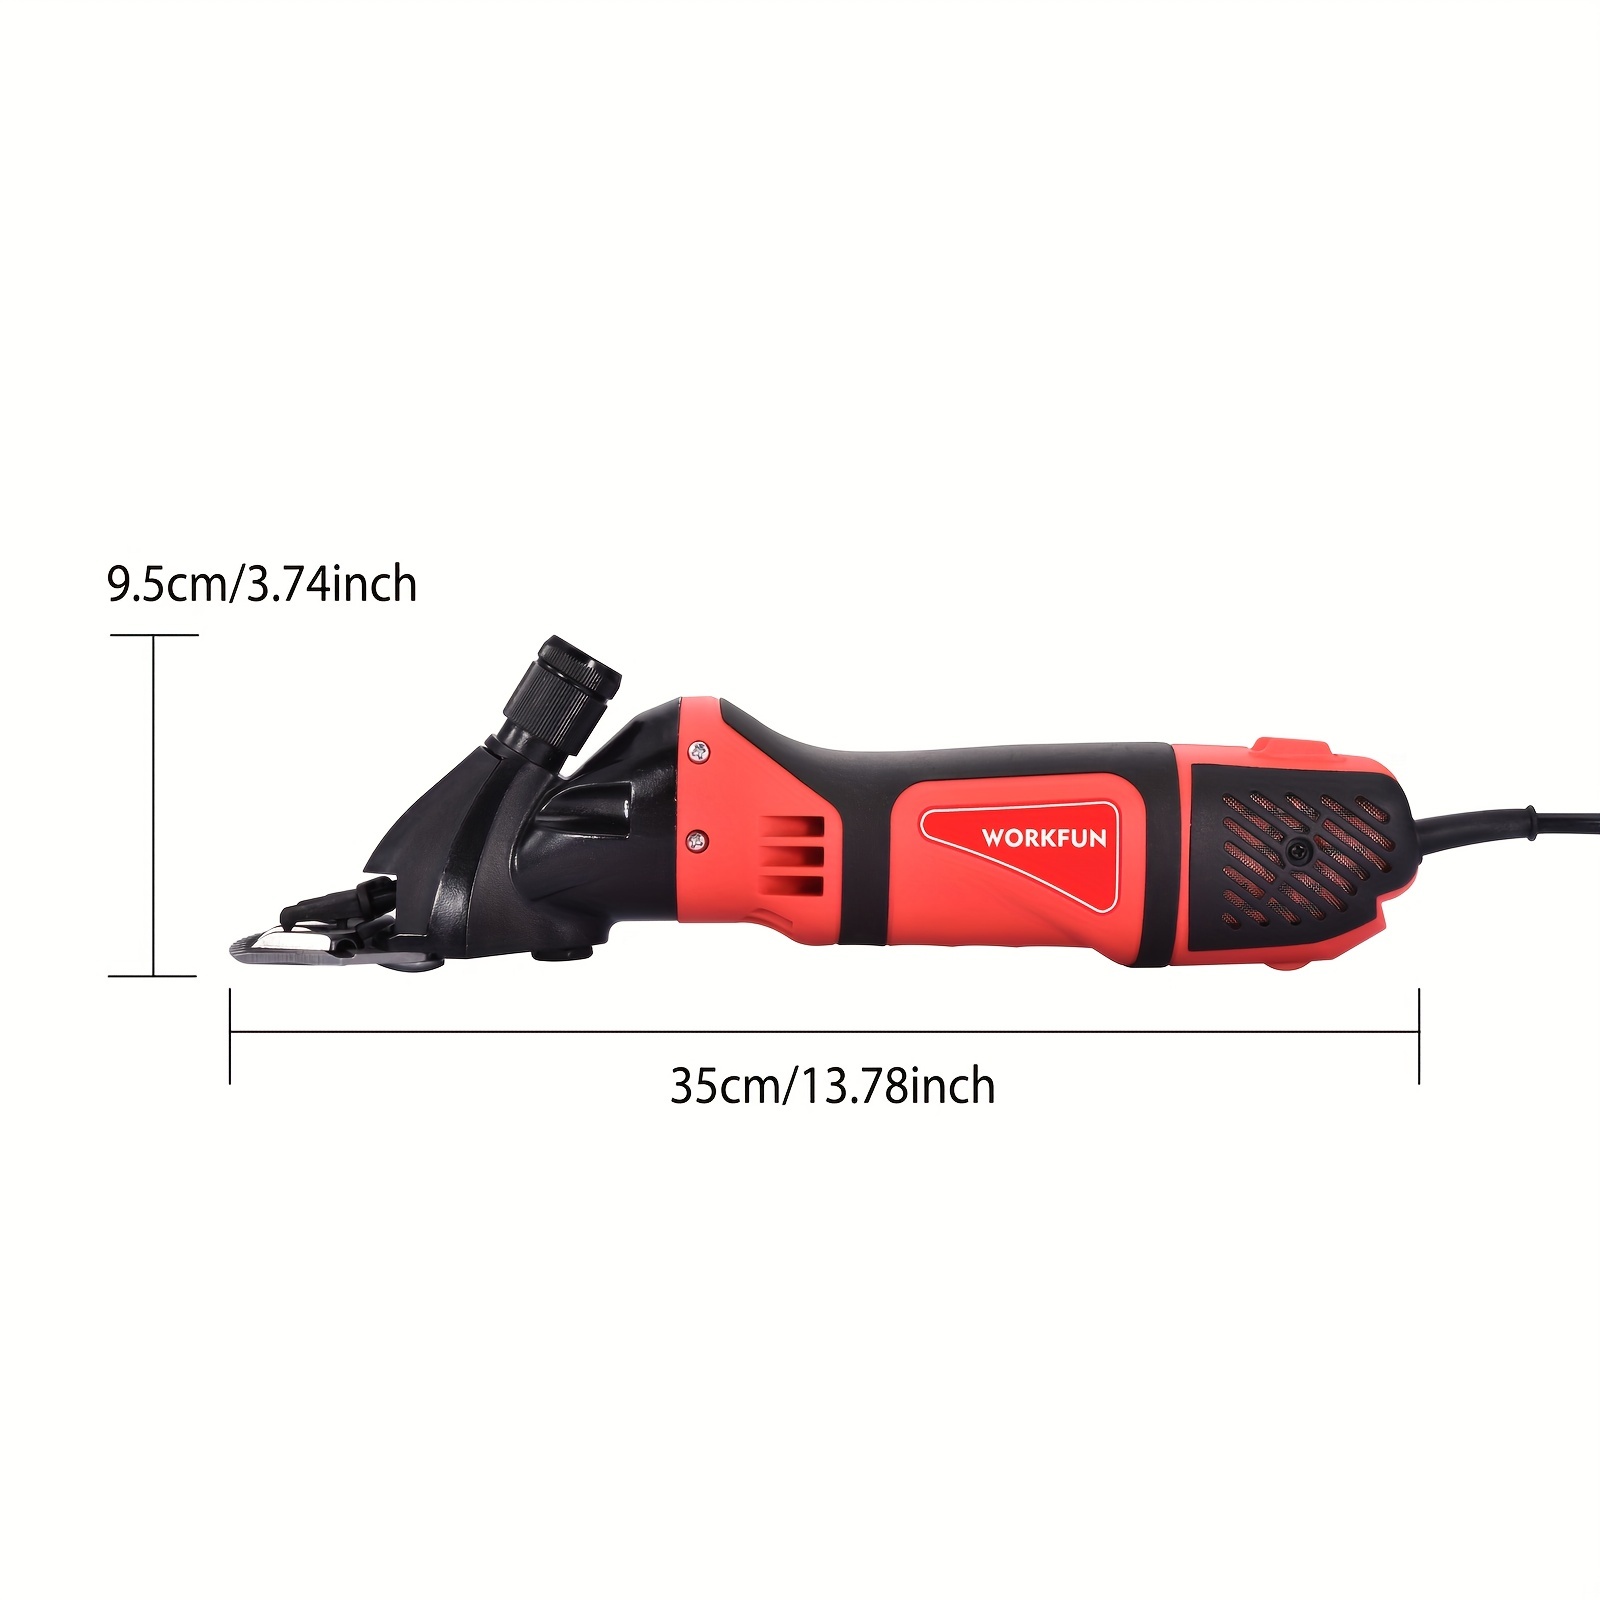 220V Electric Clippers Shears with Case for Sheep Goat Farm Animal Hair  Trimmer | eBay